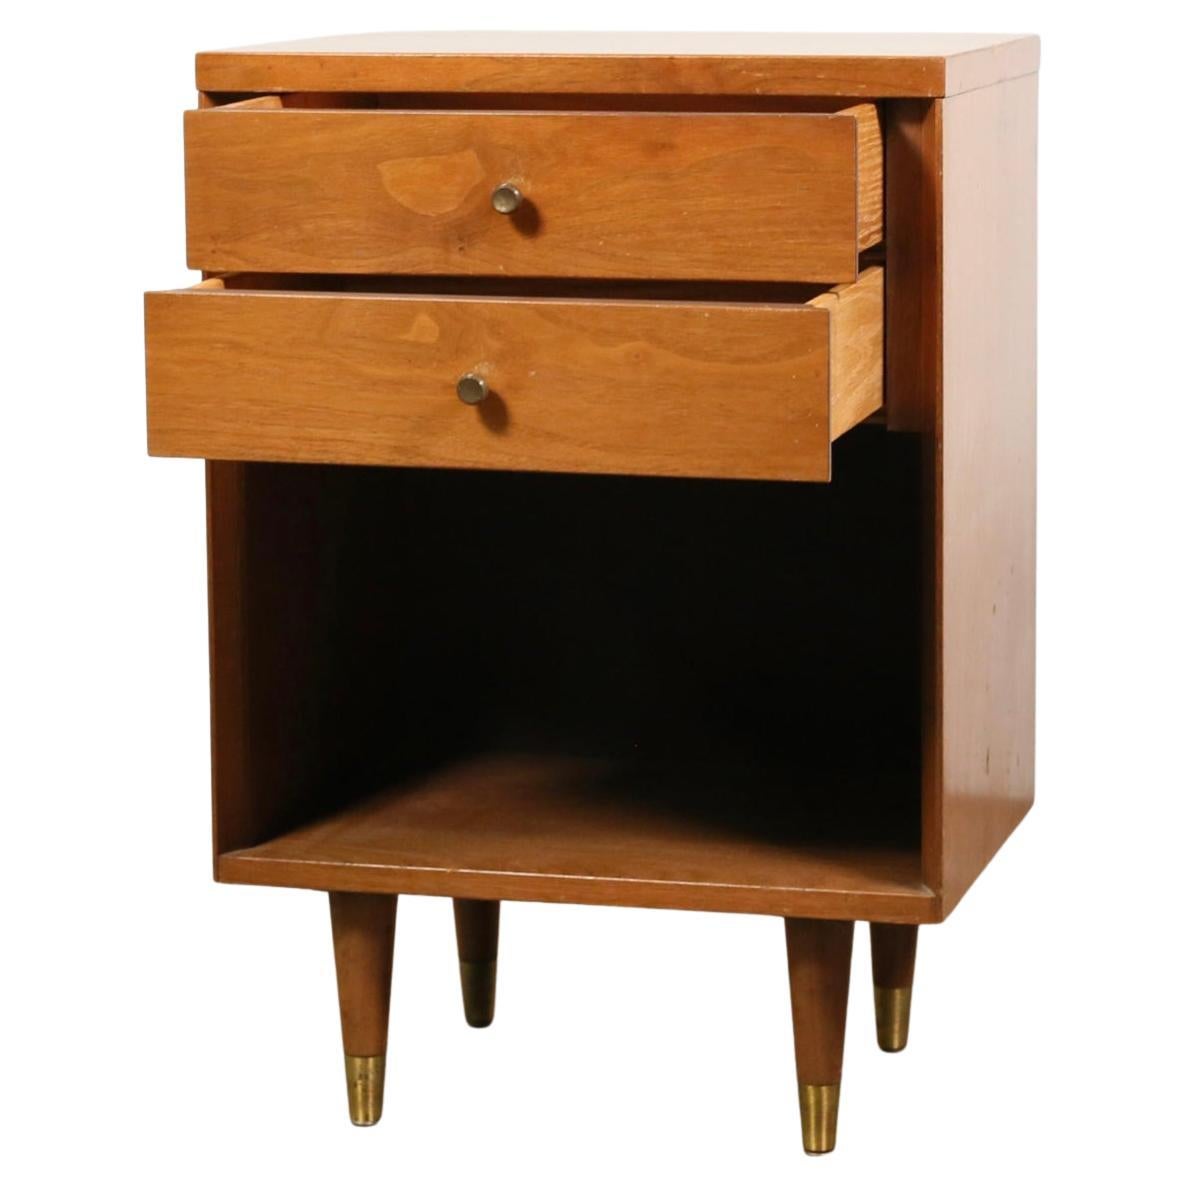 Stunning pair of Mid-Century Modern John Stuart Widdicomb walnut 2 drawer nightstands Brass Knobs and Pull Handles. Walnut wood. Very clean set of nightstands inside and out all drawers are clean and slide smooth. Very high quality construction.